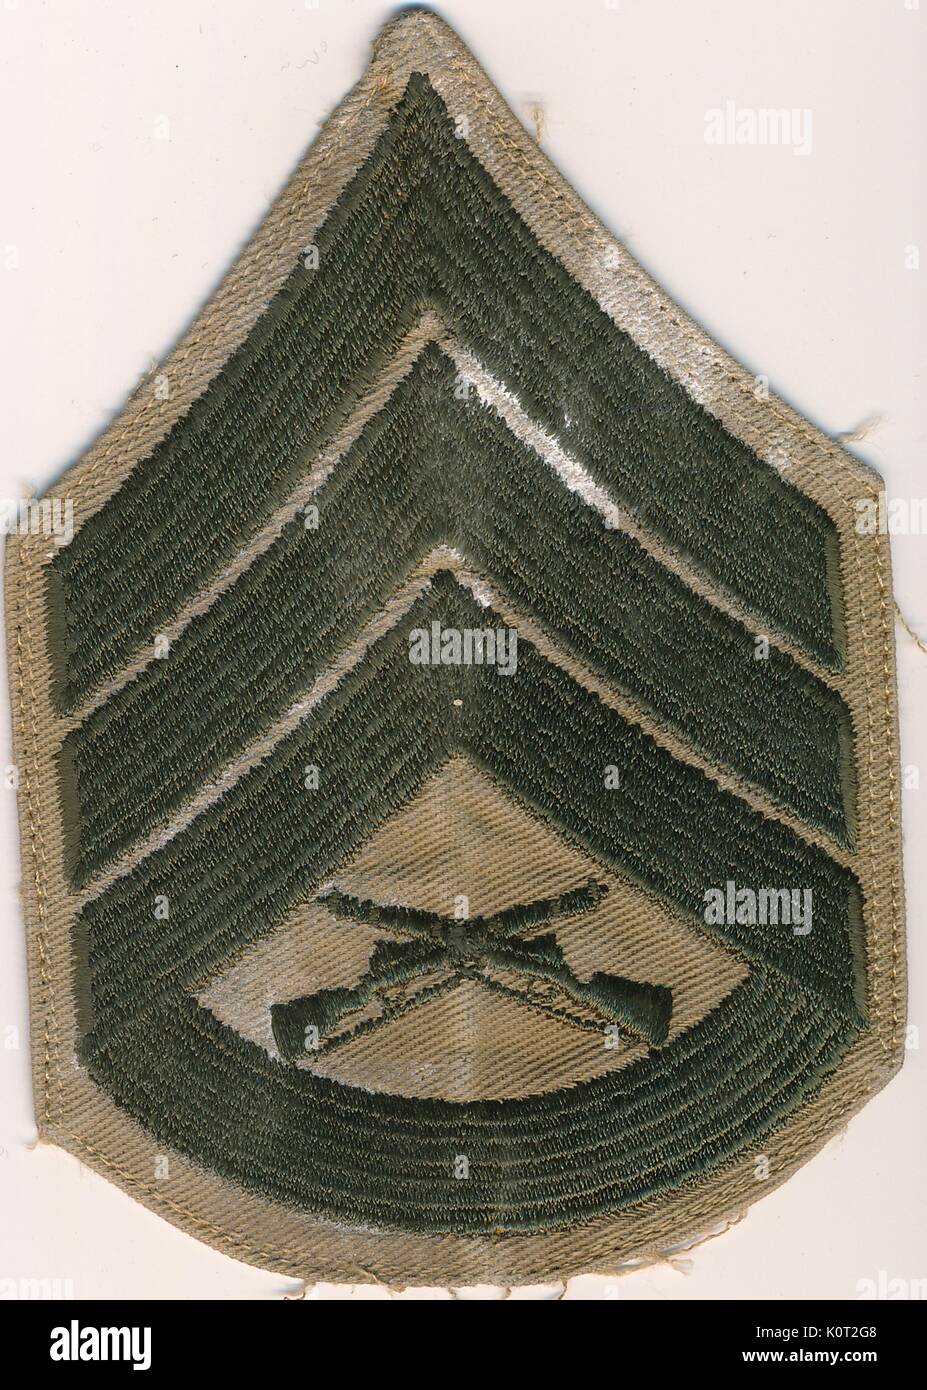 Gunnery Sergeant insignia patch from the Vietnam War, green and tan color, featuring two crossed rifles, 1964. Stock Photo